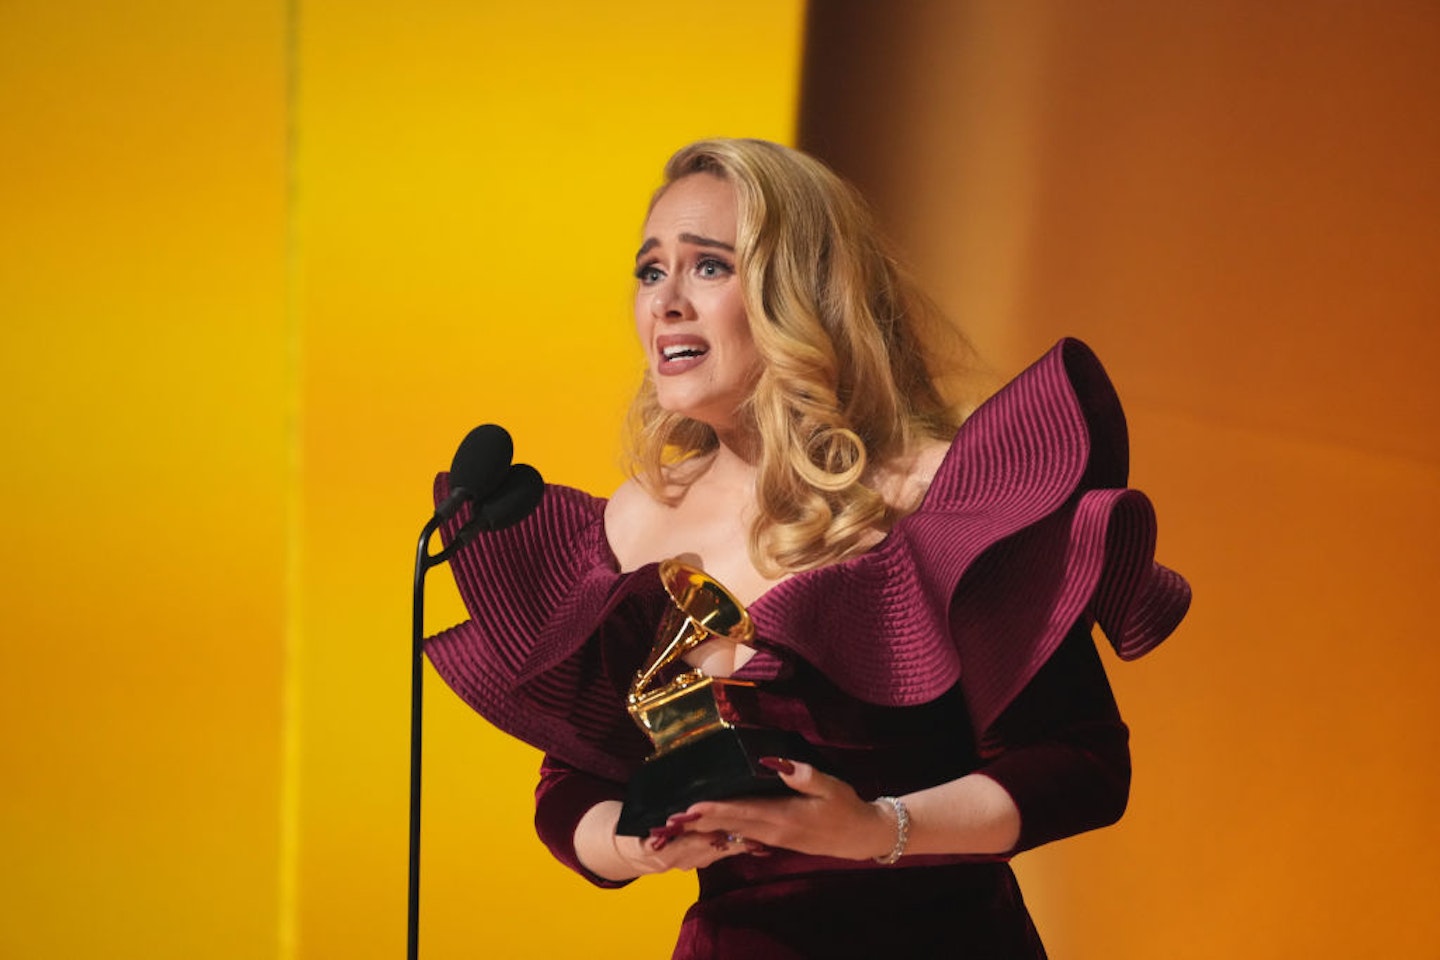 Adele Reveals She's Has A Fungal Infection Due To Wearing Spanx